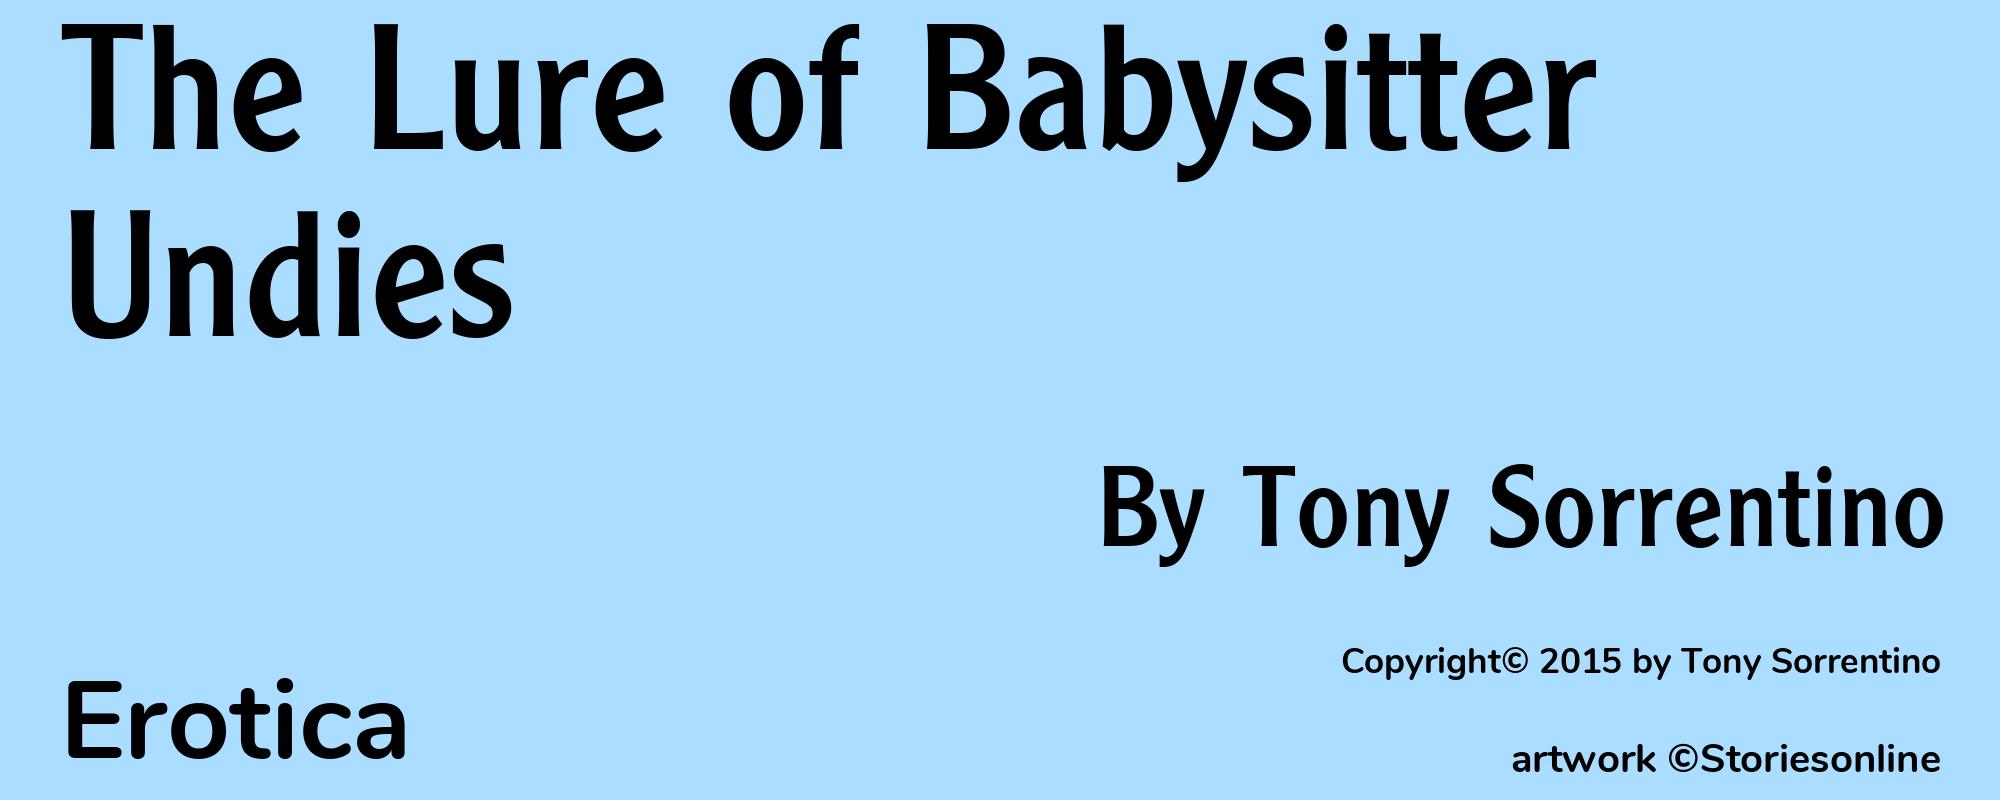 The Lure of Babysitter Undies - Cover